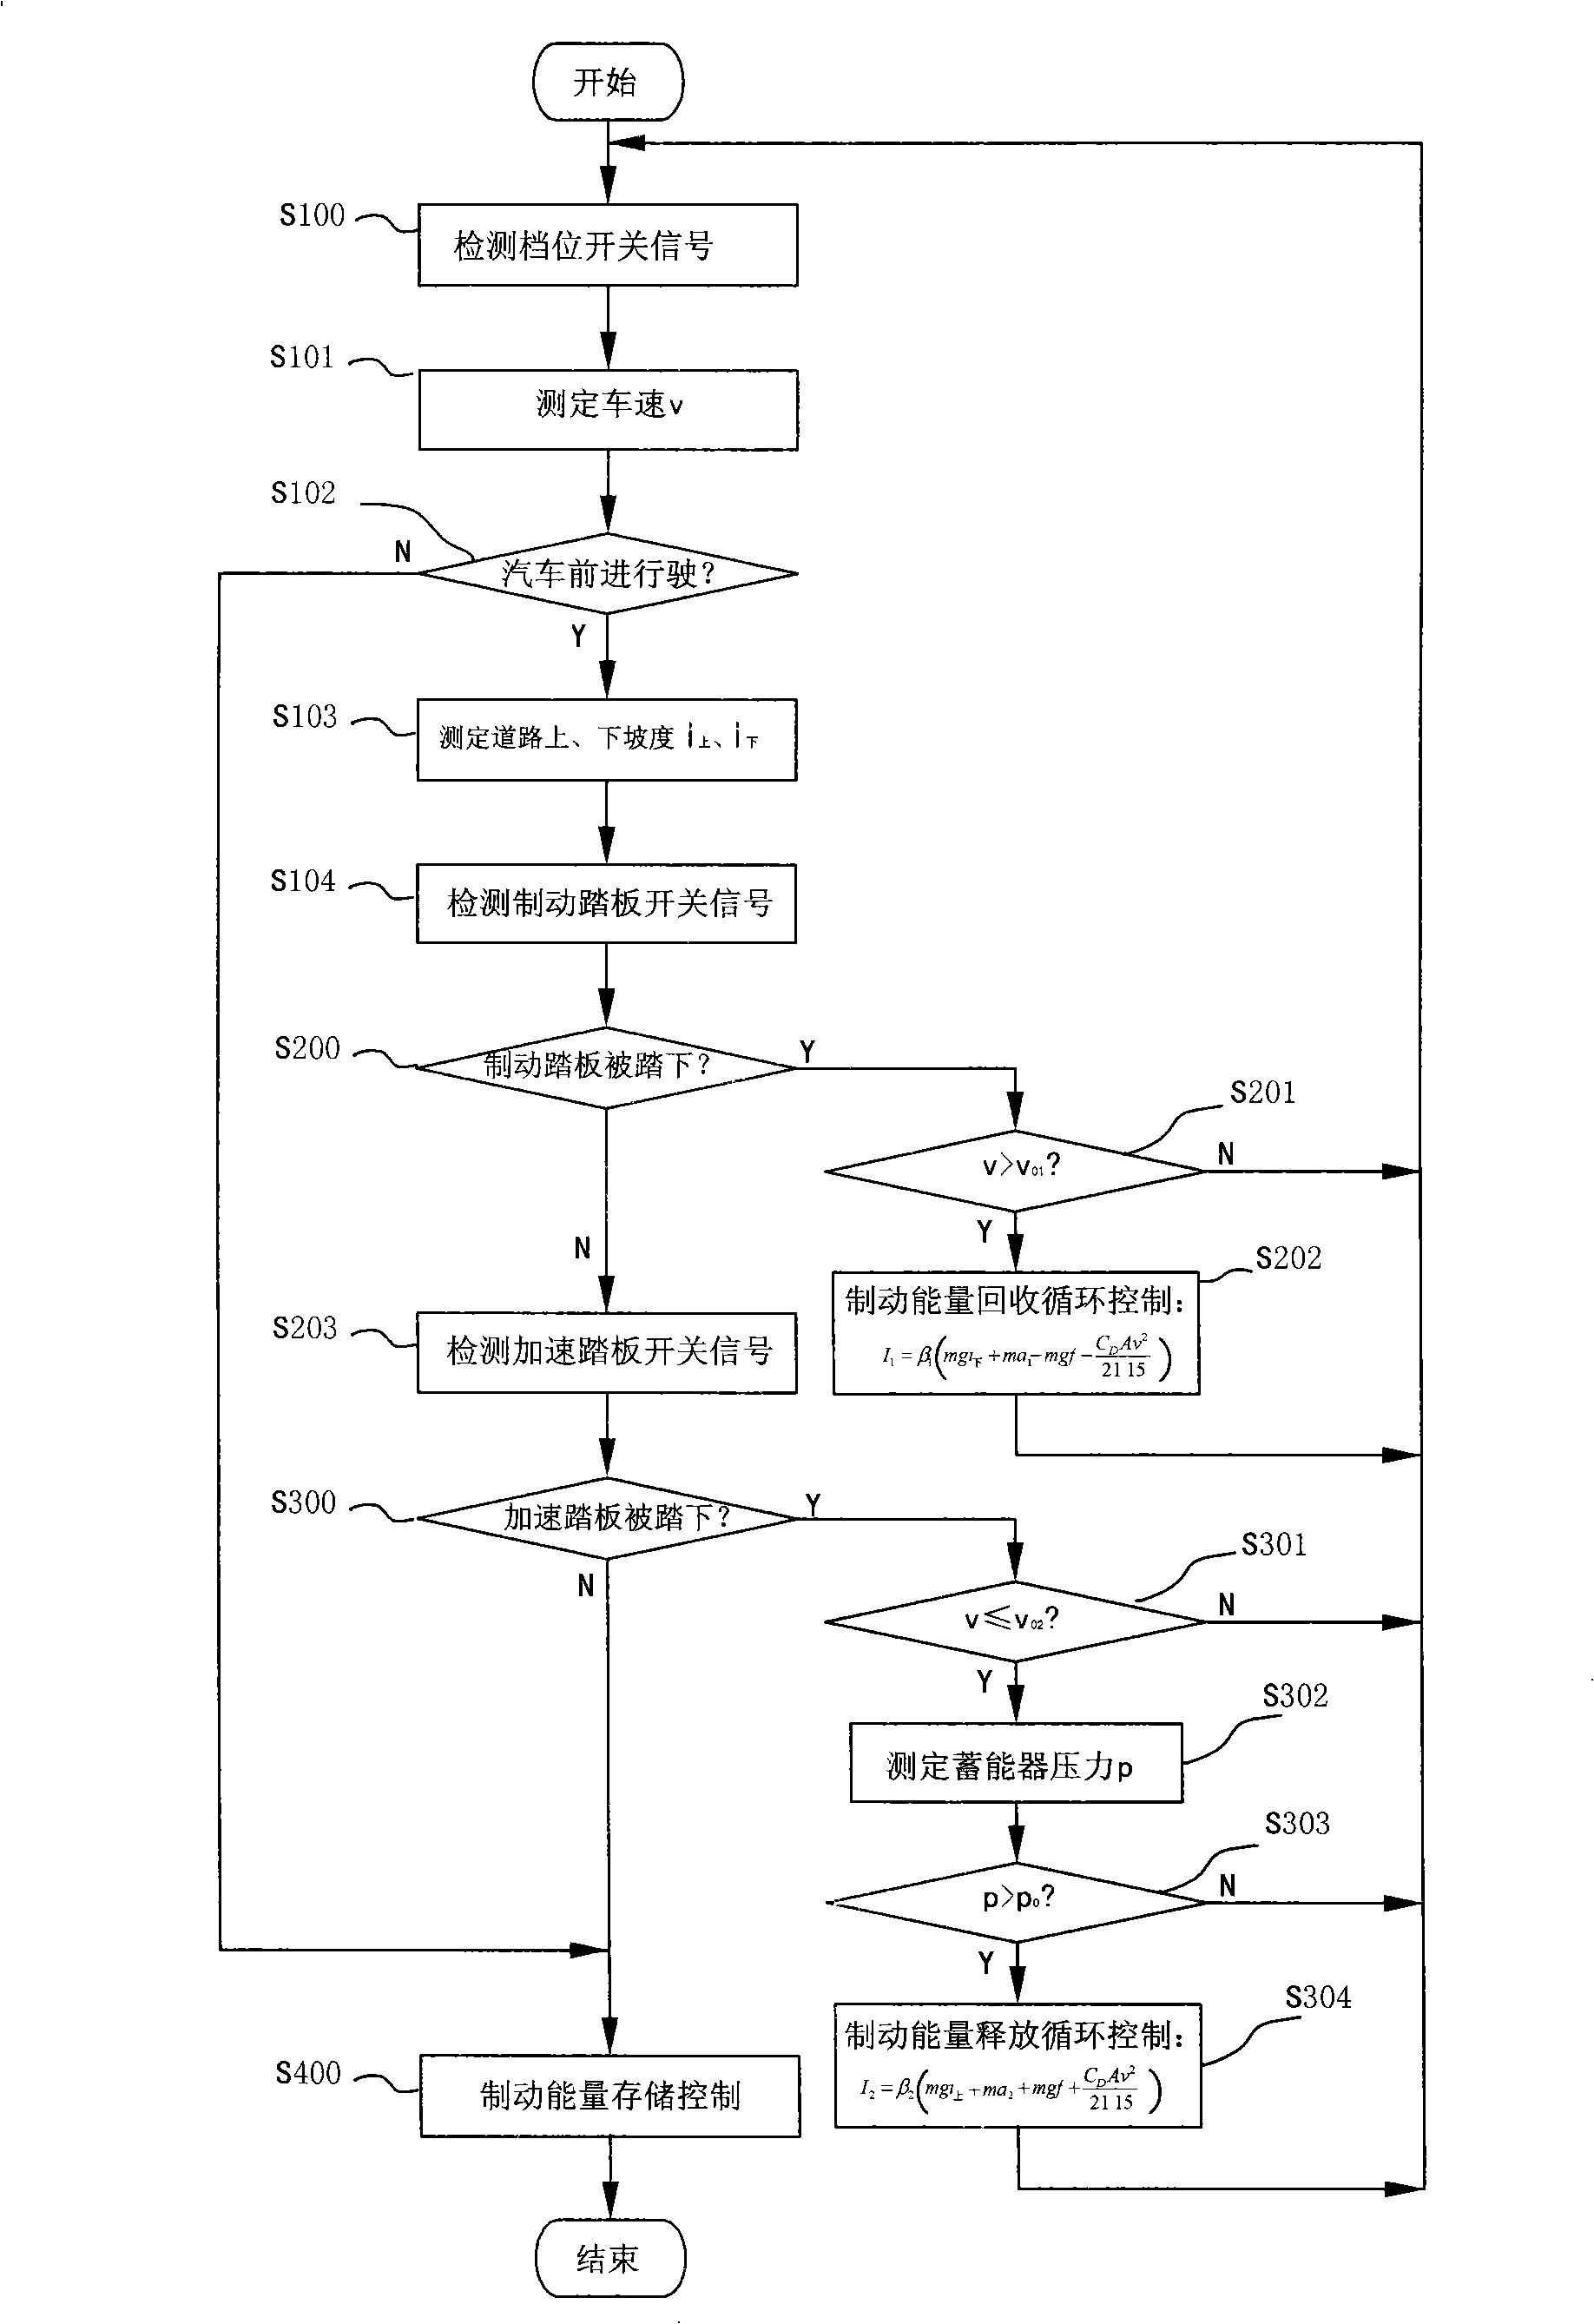 Automobile brake energy regeneration control device and system